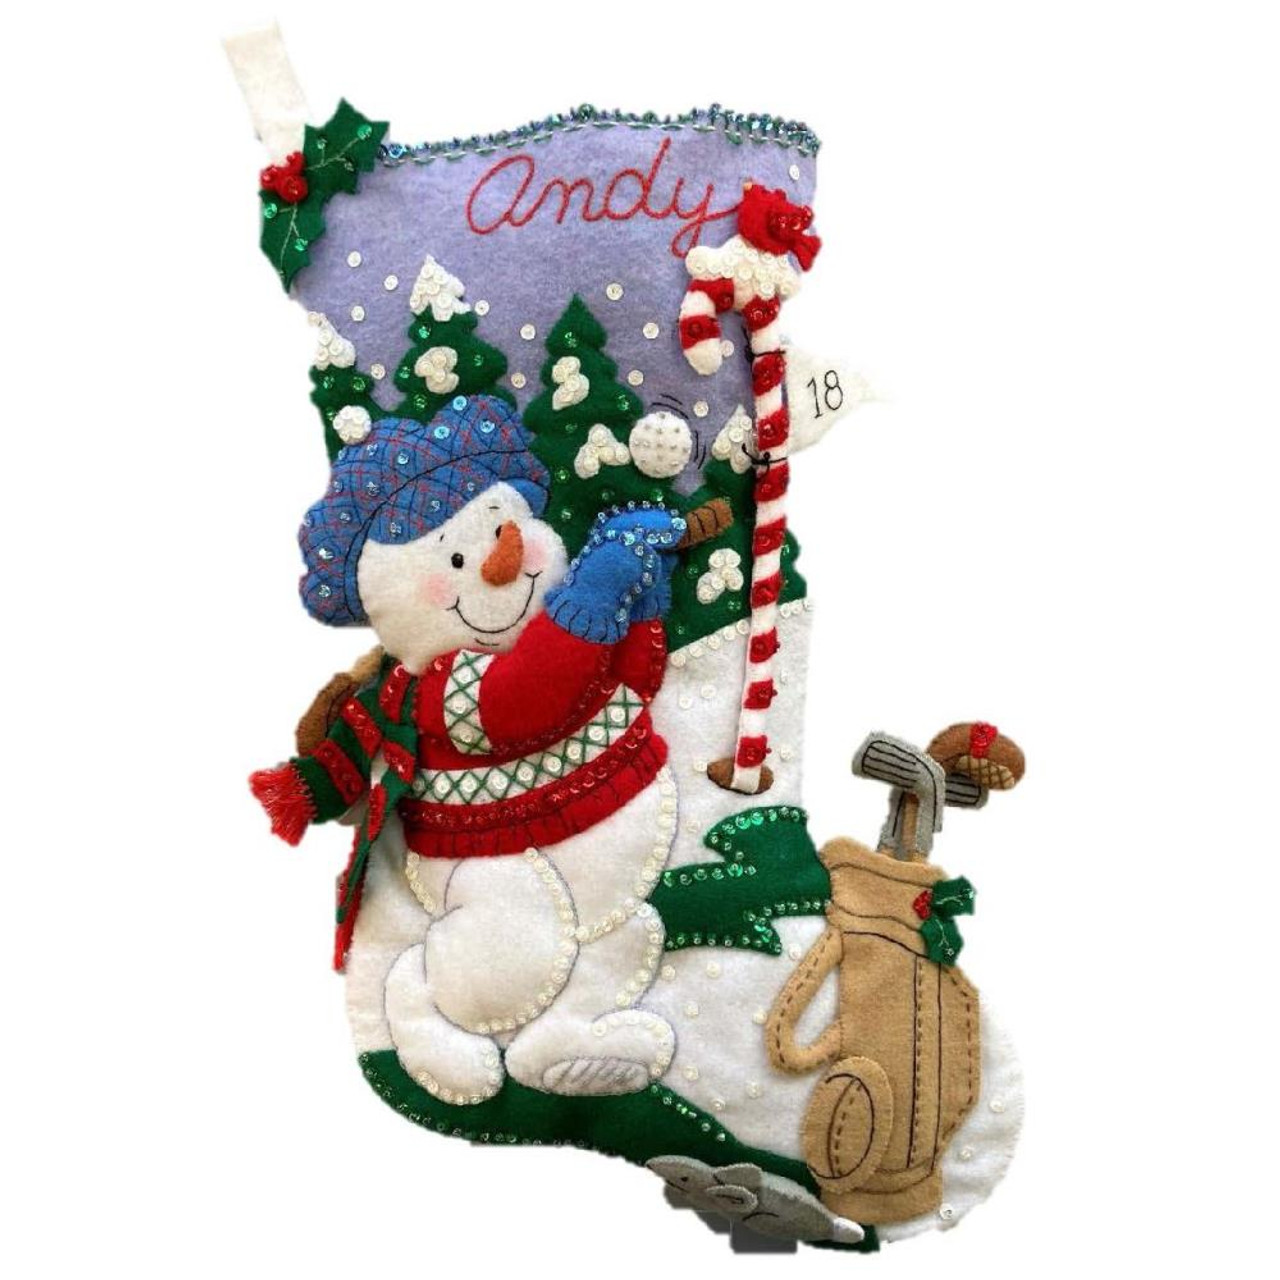 Bucilla Christmas Stocking Kit DELIVERING THE MAIL 18 Snowman